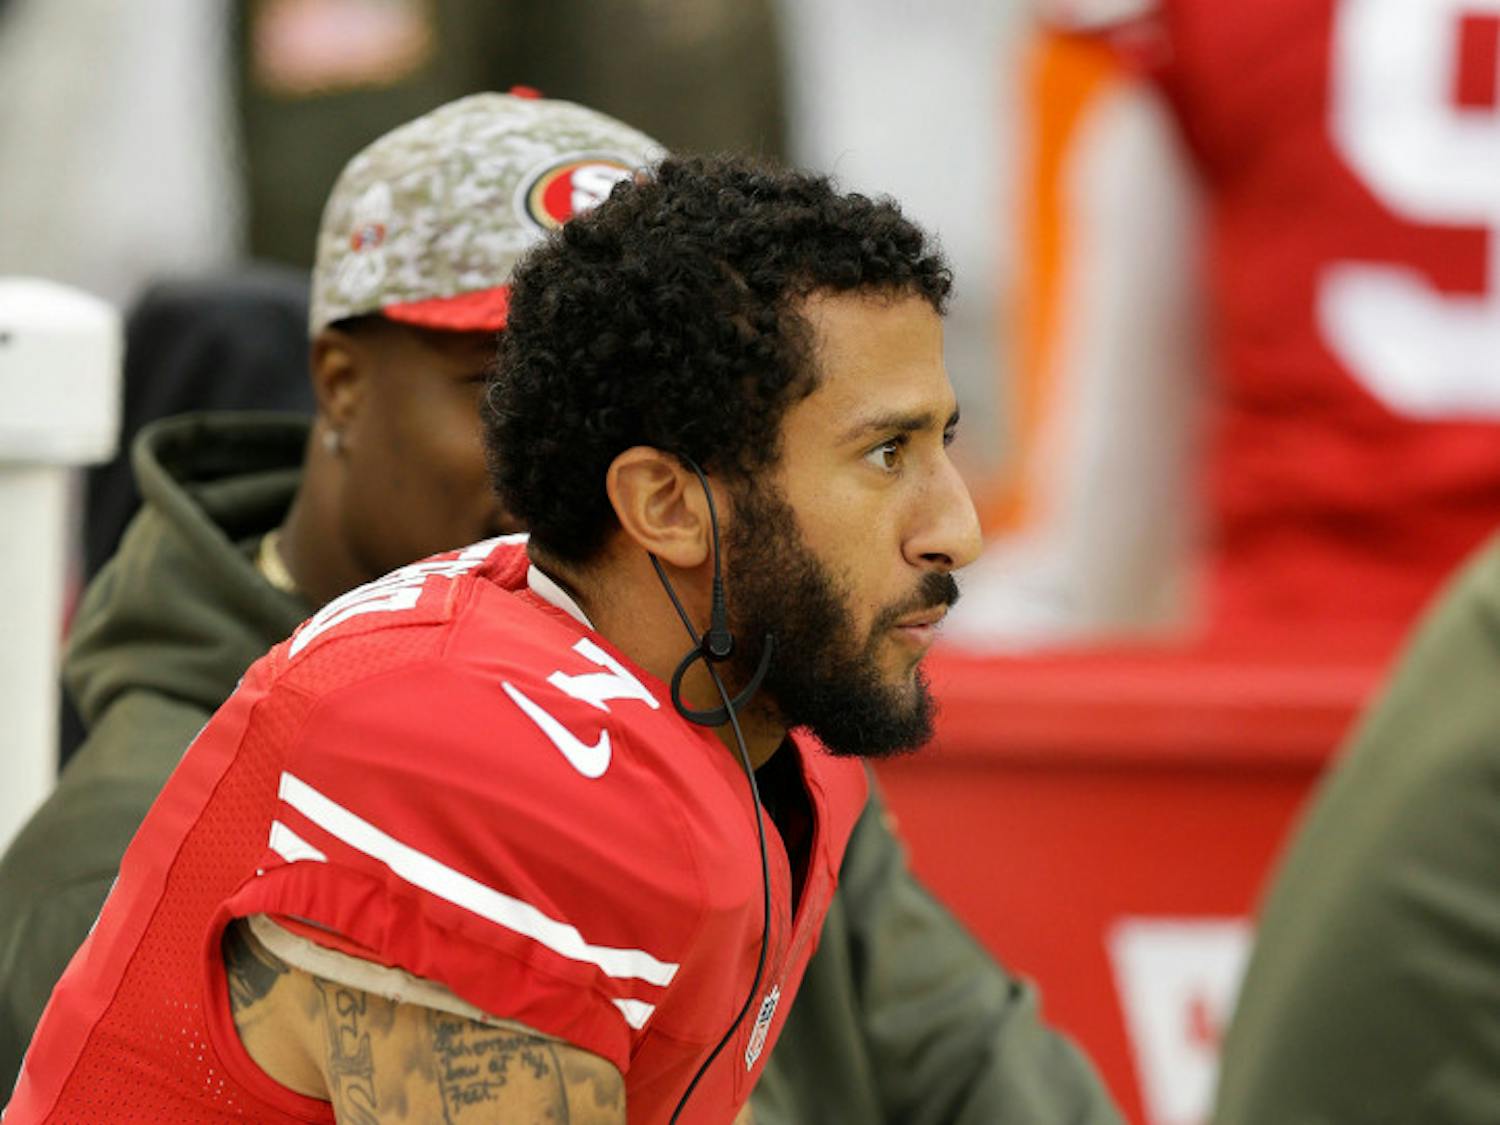 FILE--In this Nov. 8, 2015, file photo, San Francisco 49ers quarterback Colin Kaepernick sits on the sideline during the second half of an NFL football game against the Atlanta Falcons in Santa Clara, Calif. A northern Nevada airport is getting an earful about a decorative display that, in part, highlights Kaepernick, a treasured product of the University of Nevada's football program who in recent days has been in the spotlight over his decision to sit down during the national anthem. (AP Photo/Ben Margot, File)